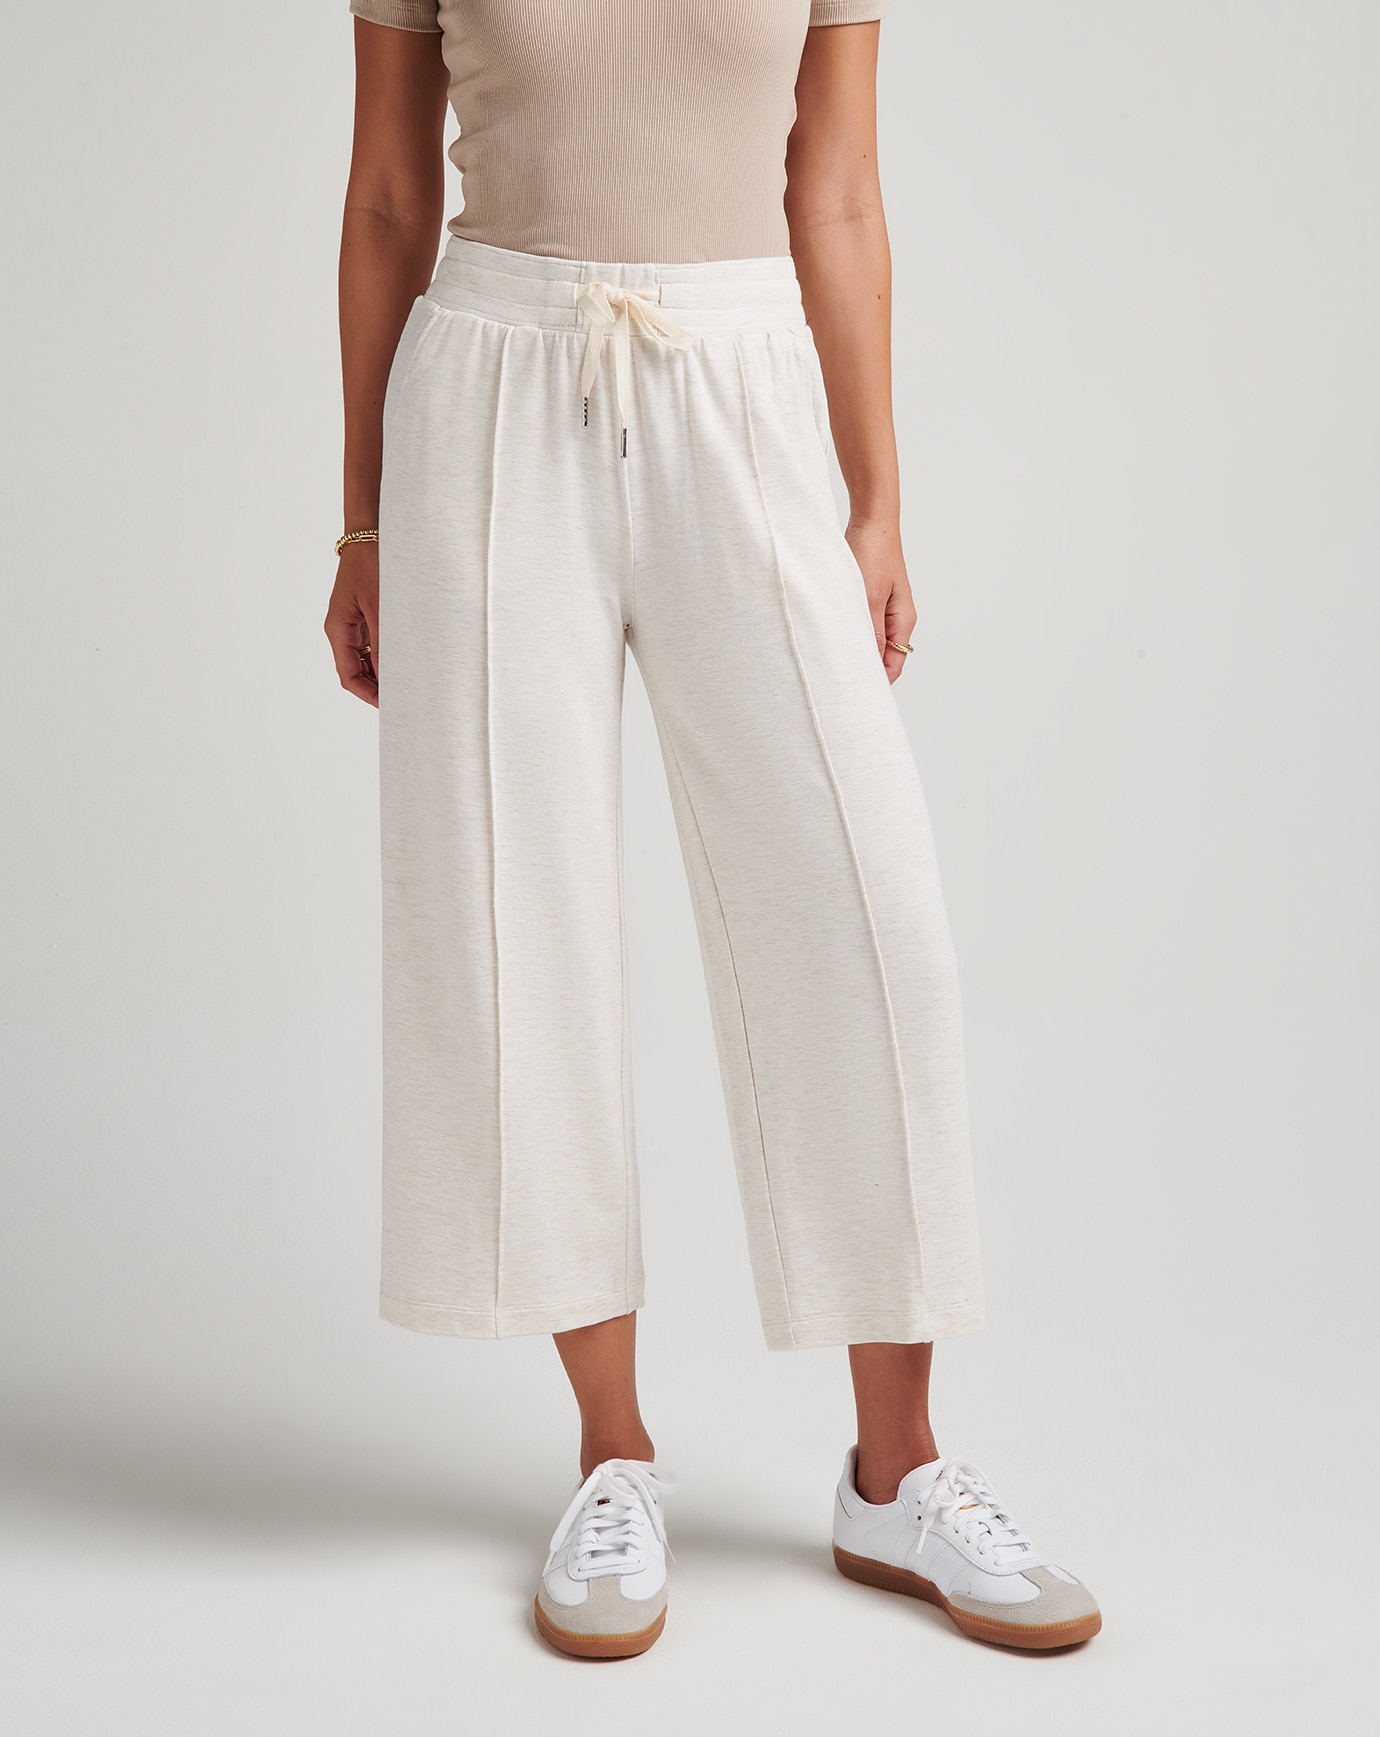 Related Product - STUDIO CITY CLOUD FRENCH TERRY PANTS